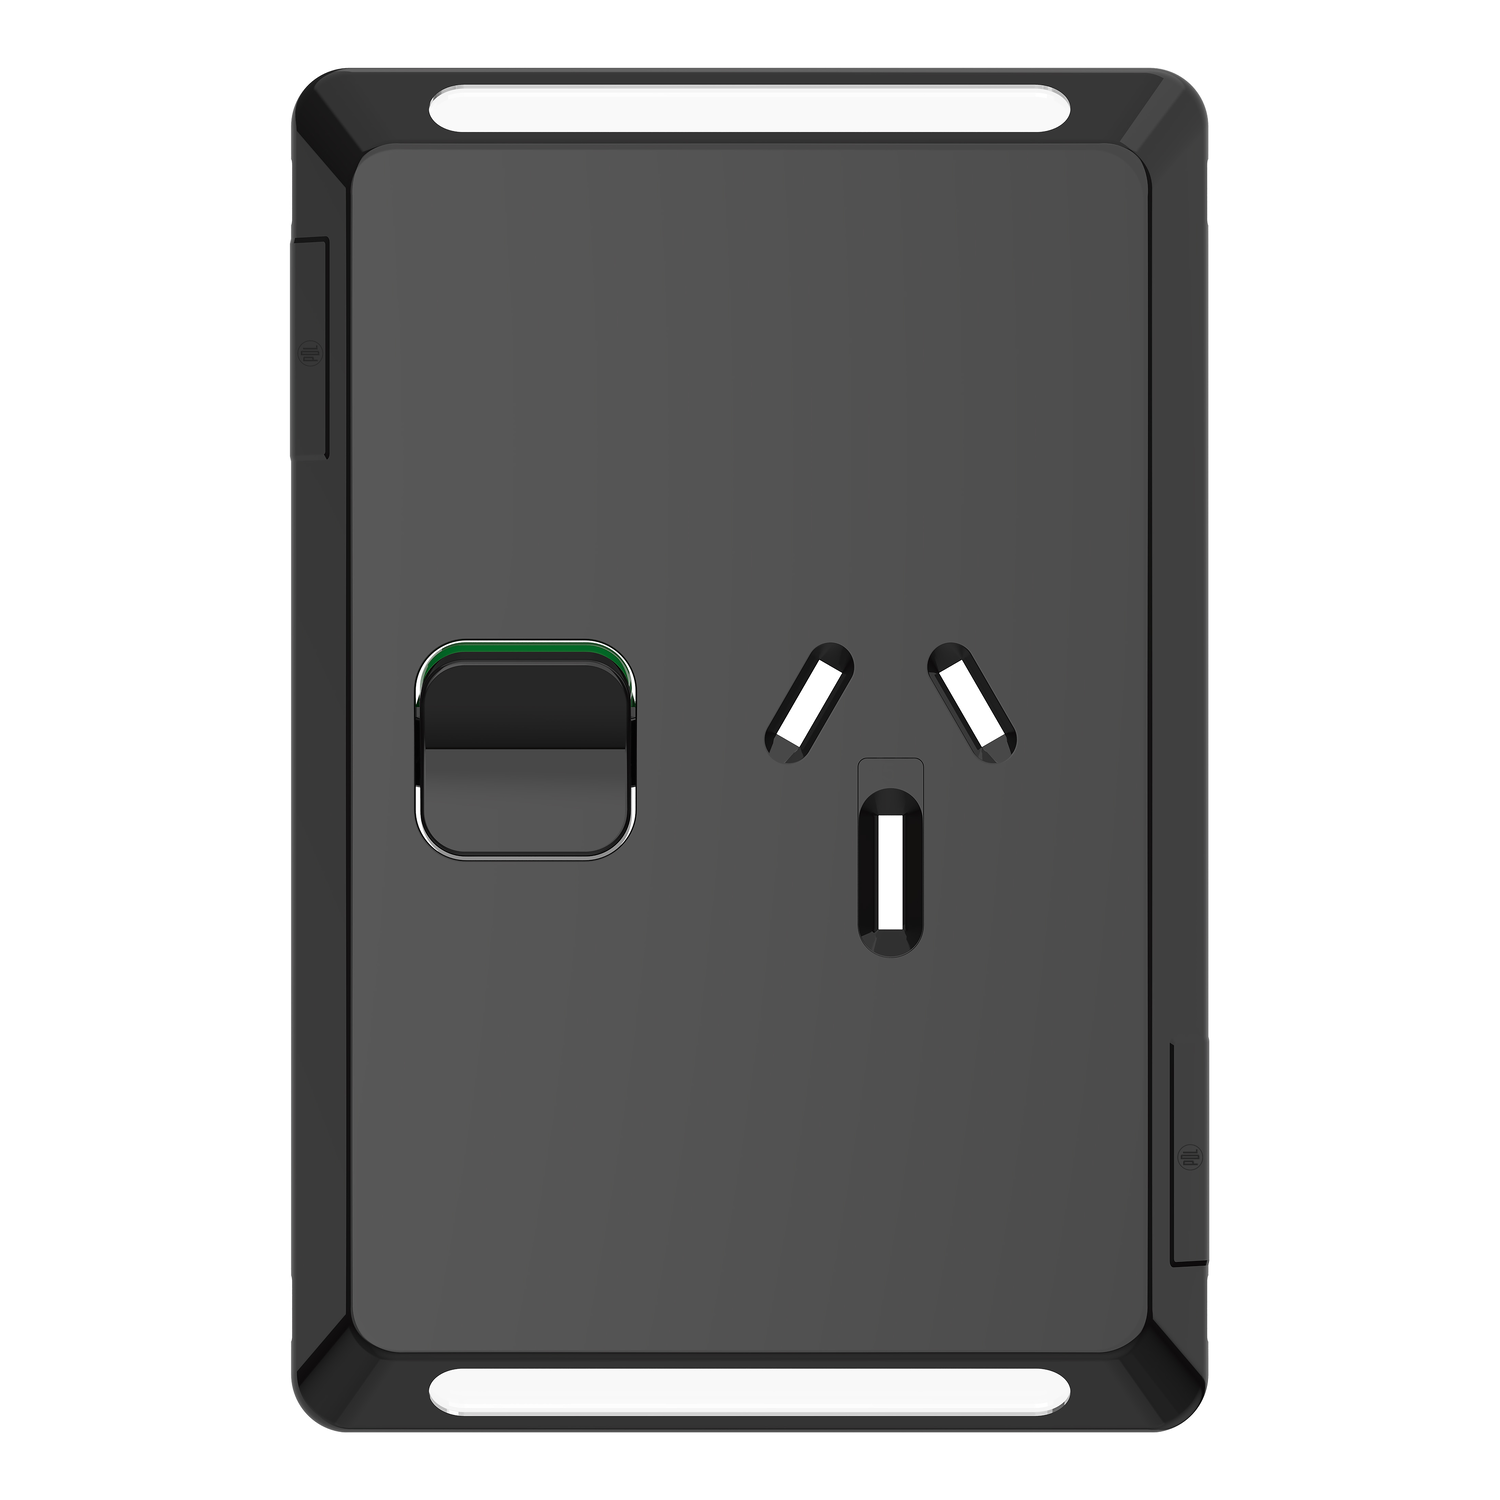 PDL Pro Series - Cover Plate Switched Socket 15A Vertical - Black